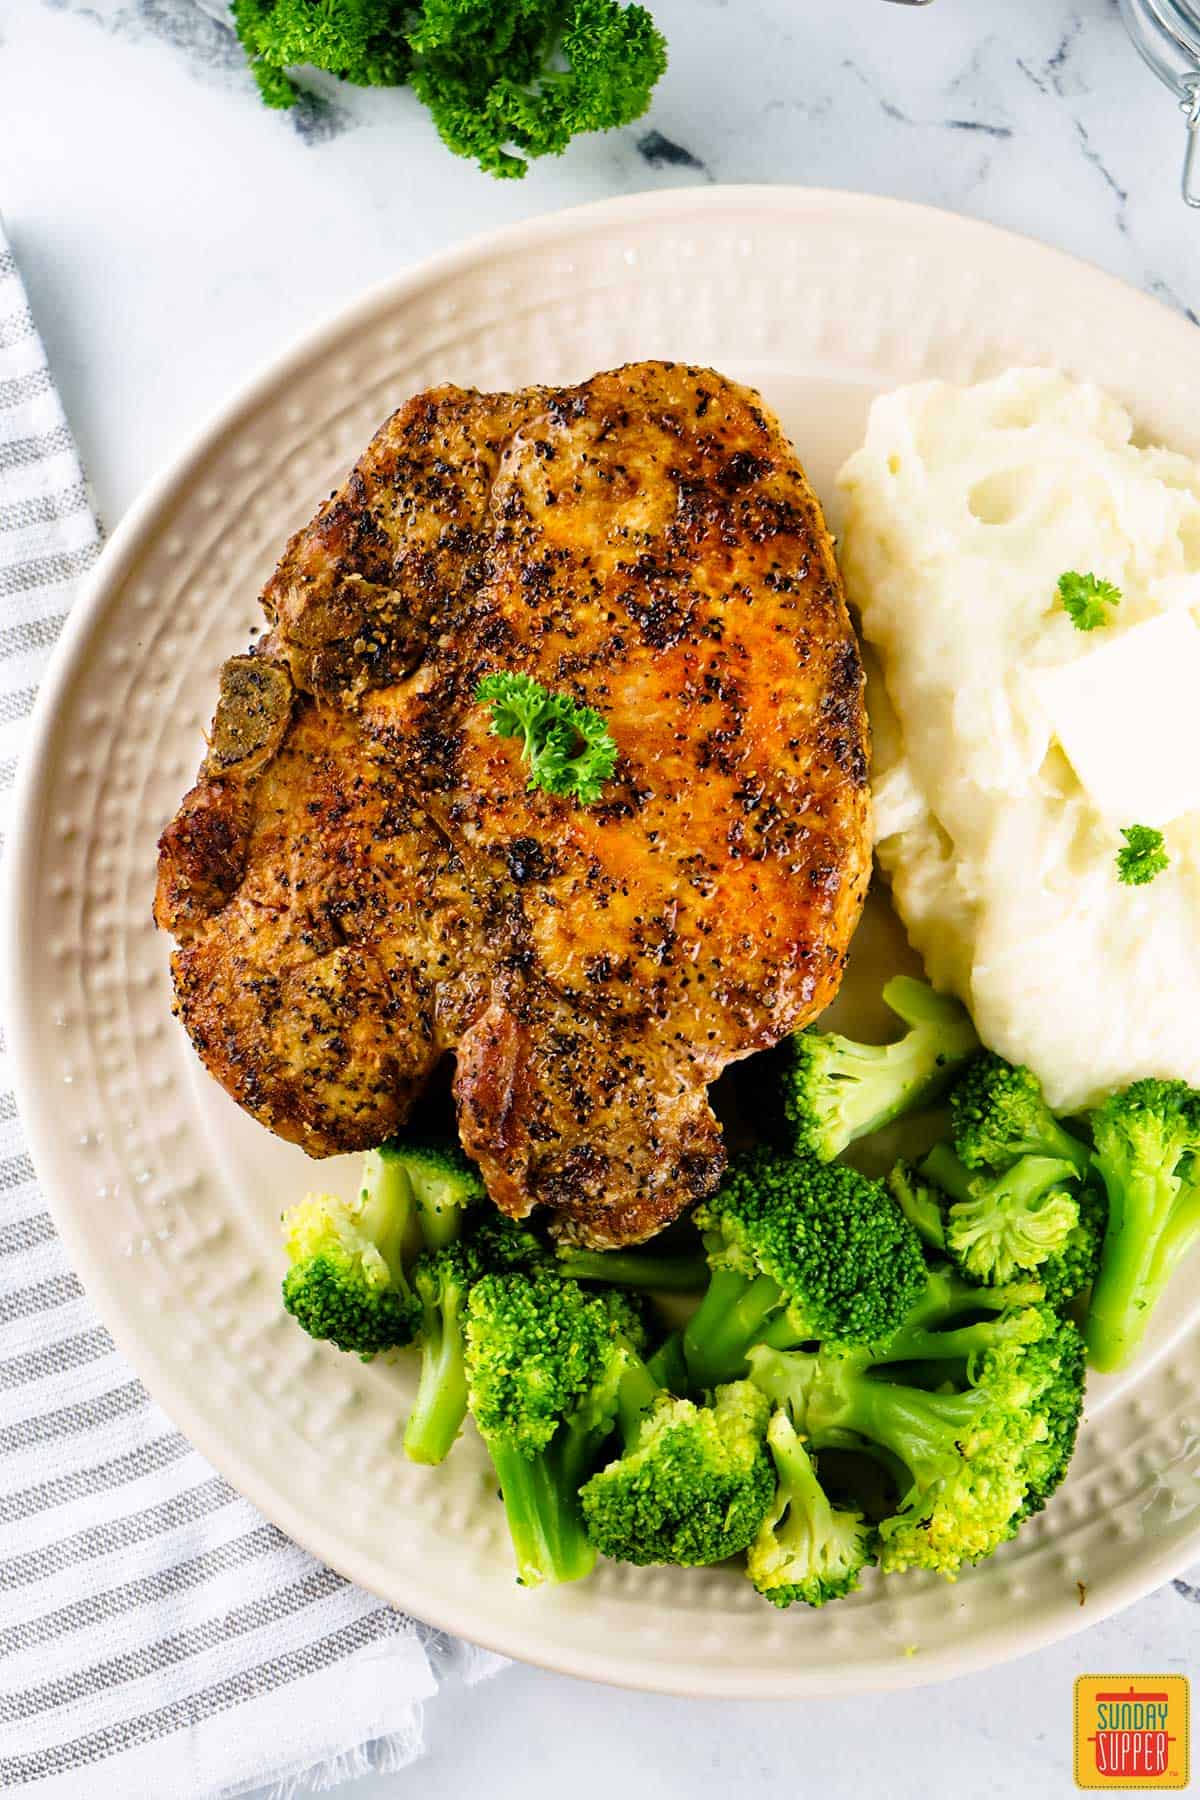 Grilled pork chop on a white plate with mashed potatoes and broccoli